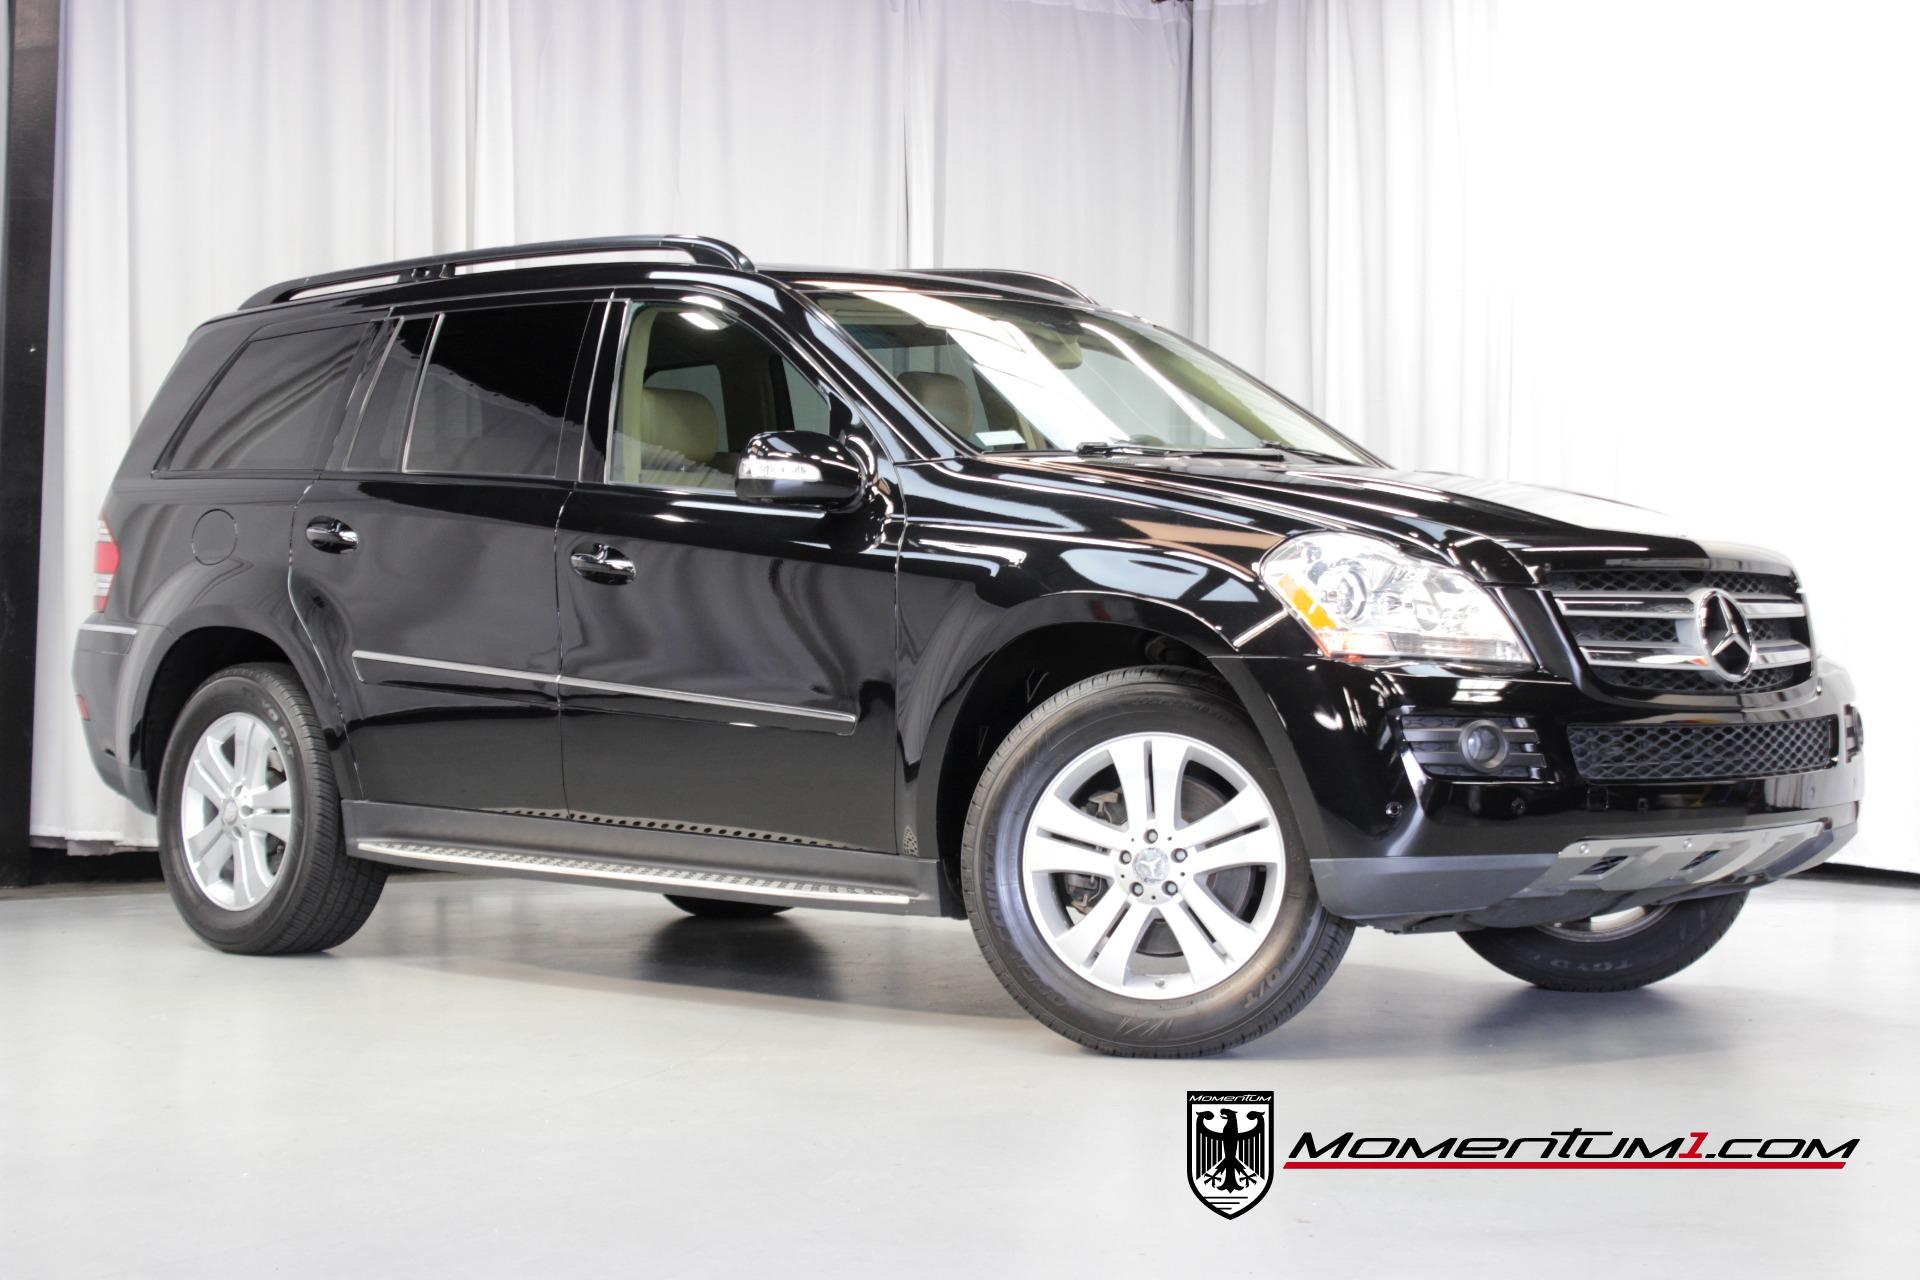 Used 2008 Mercedes-Benz GL-Class GL 450 4MATIC For Sale (Sold) | Momentum  Motorcars Inc Stock #351930